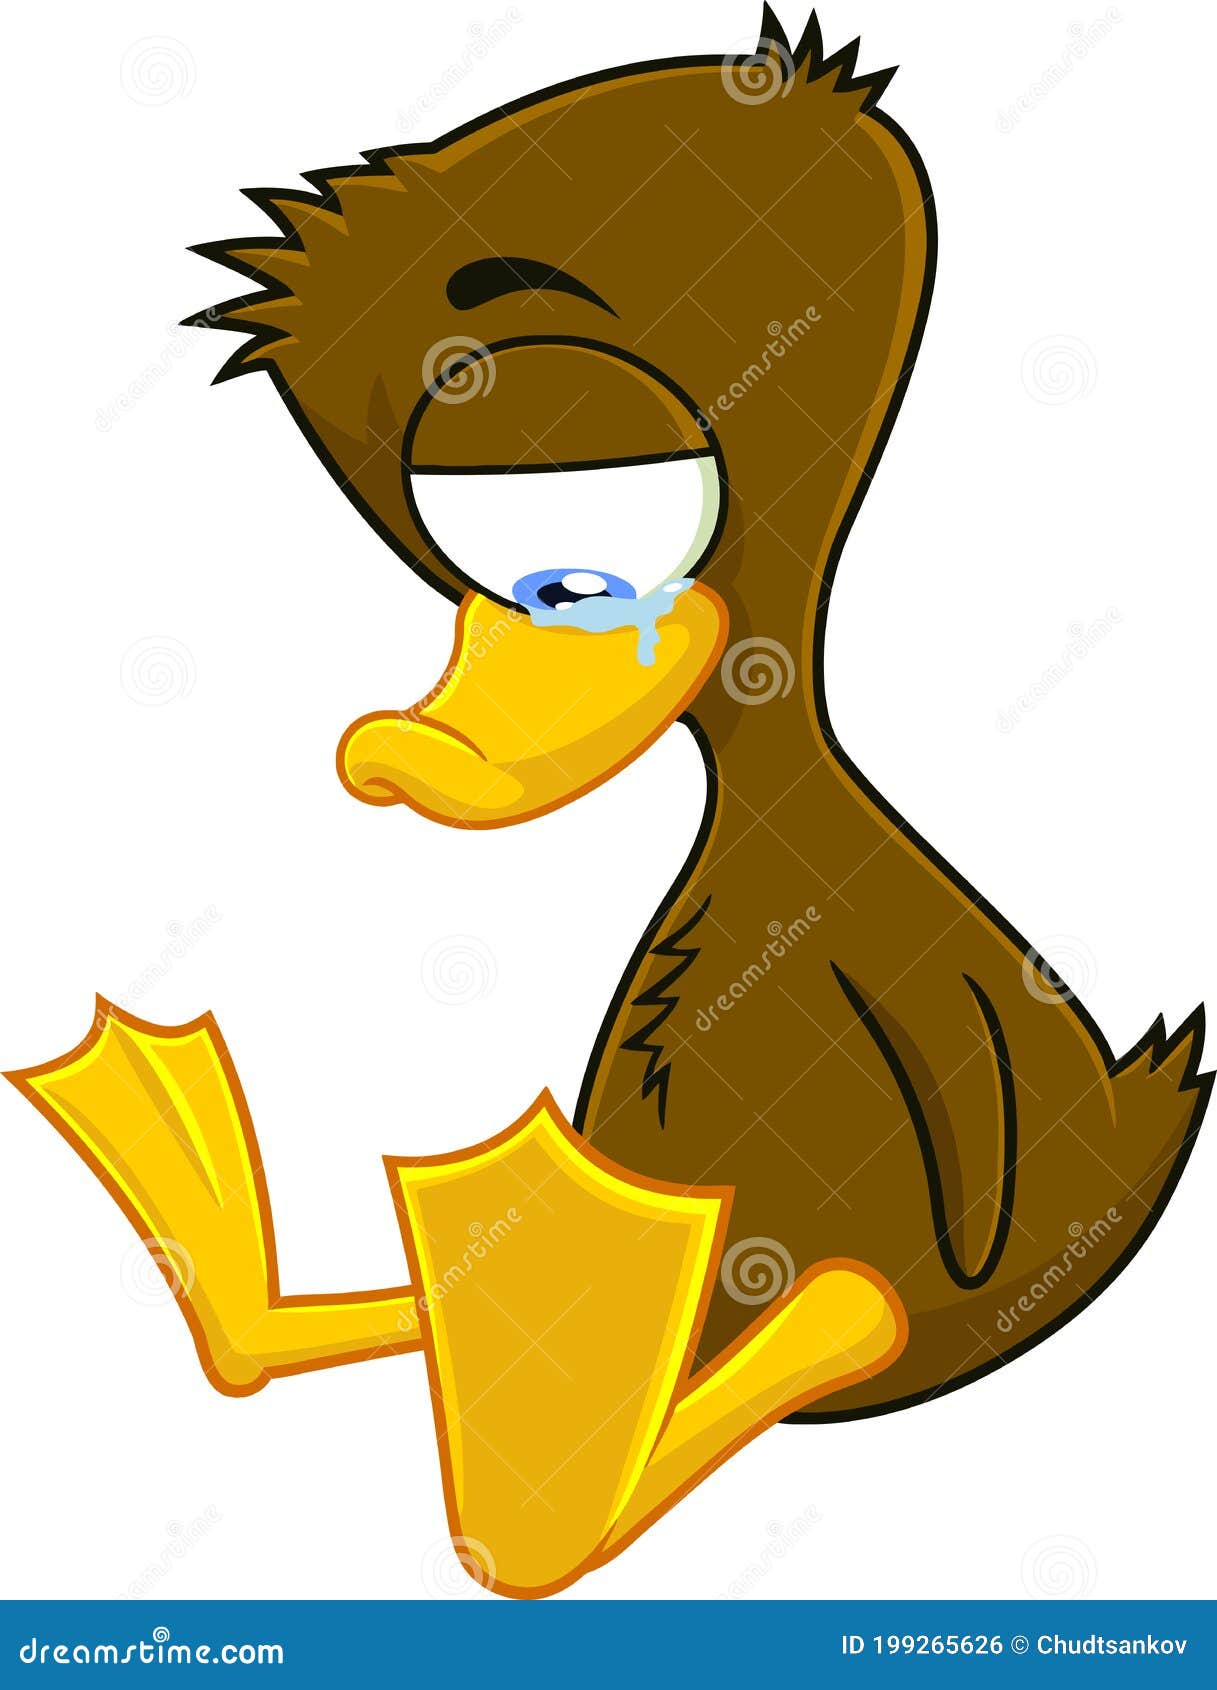 https://thumbs.dreamstime.com/z/ugly-duckling-cartoon-character-crying-vector-illustration-isolated-white-background-ugly-duckling-cartoon-character-crying-199265626.jpg